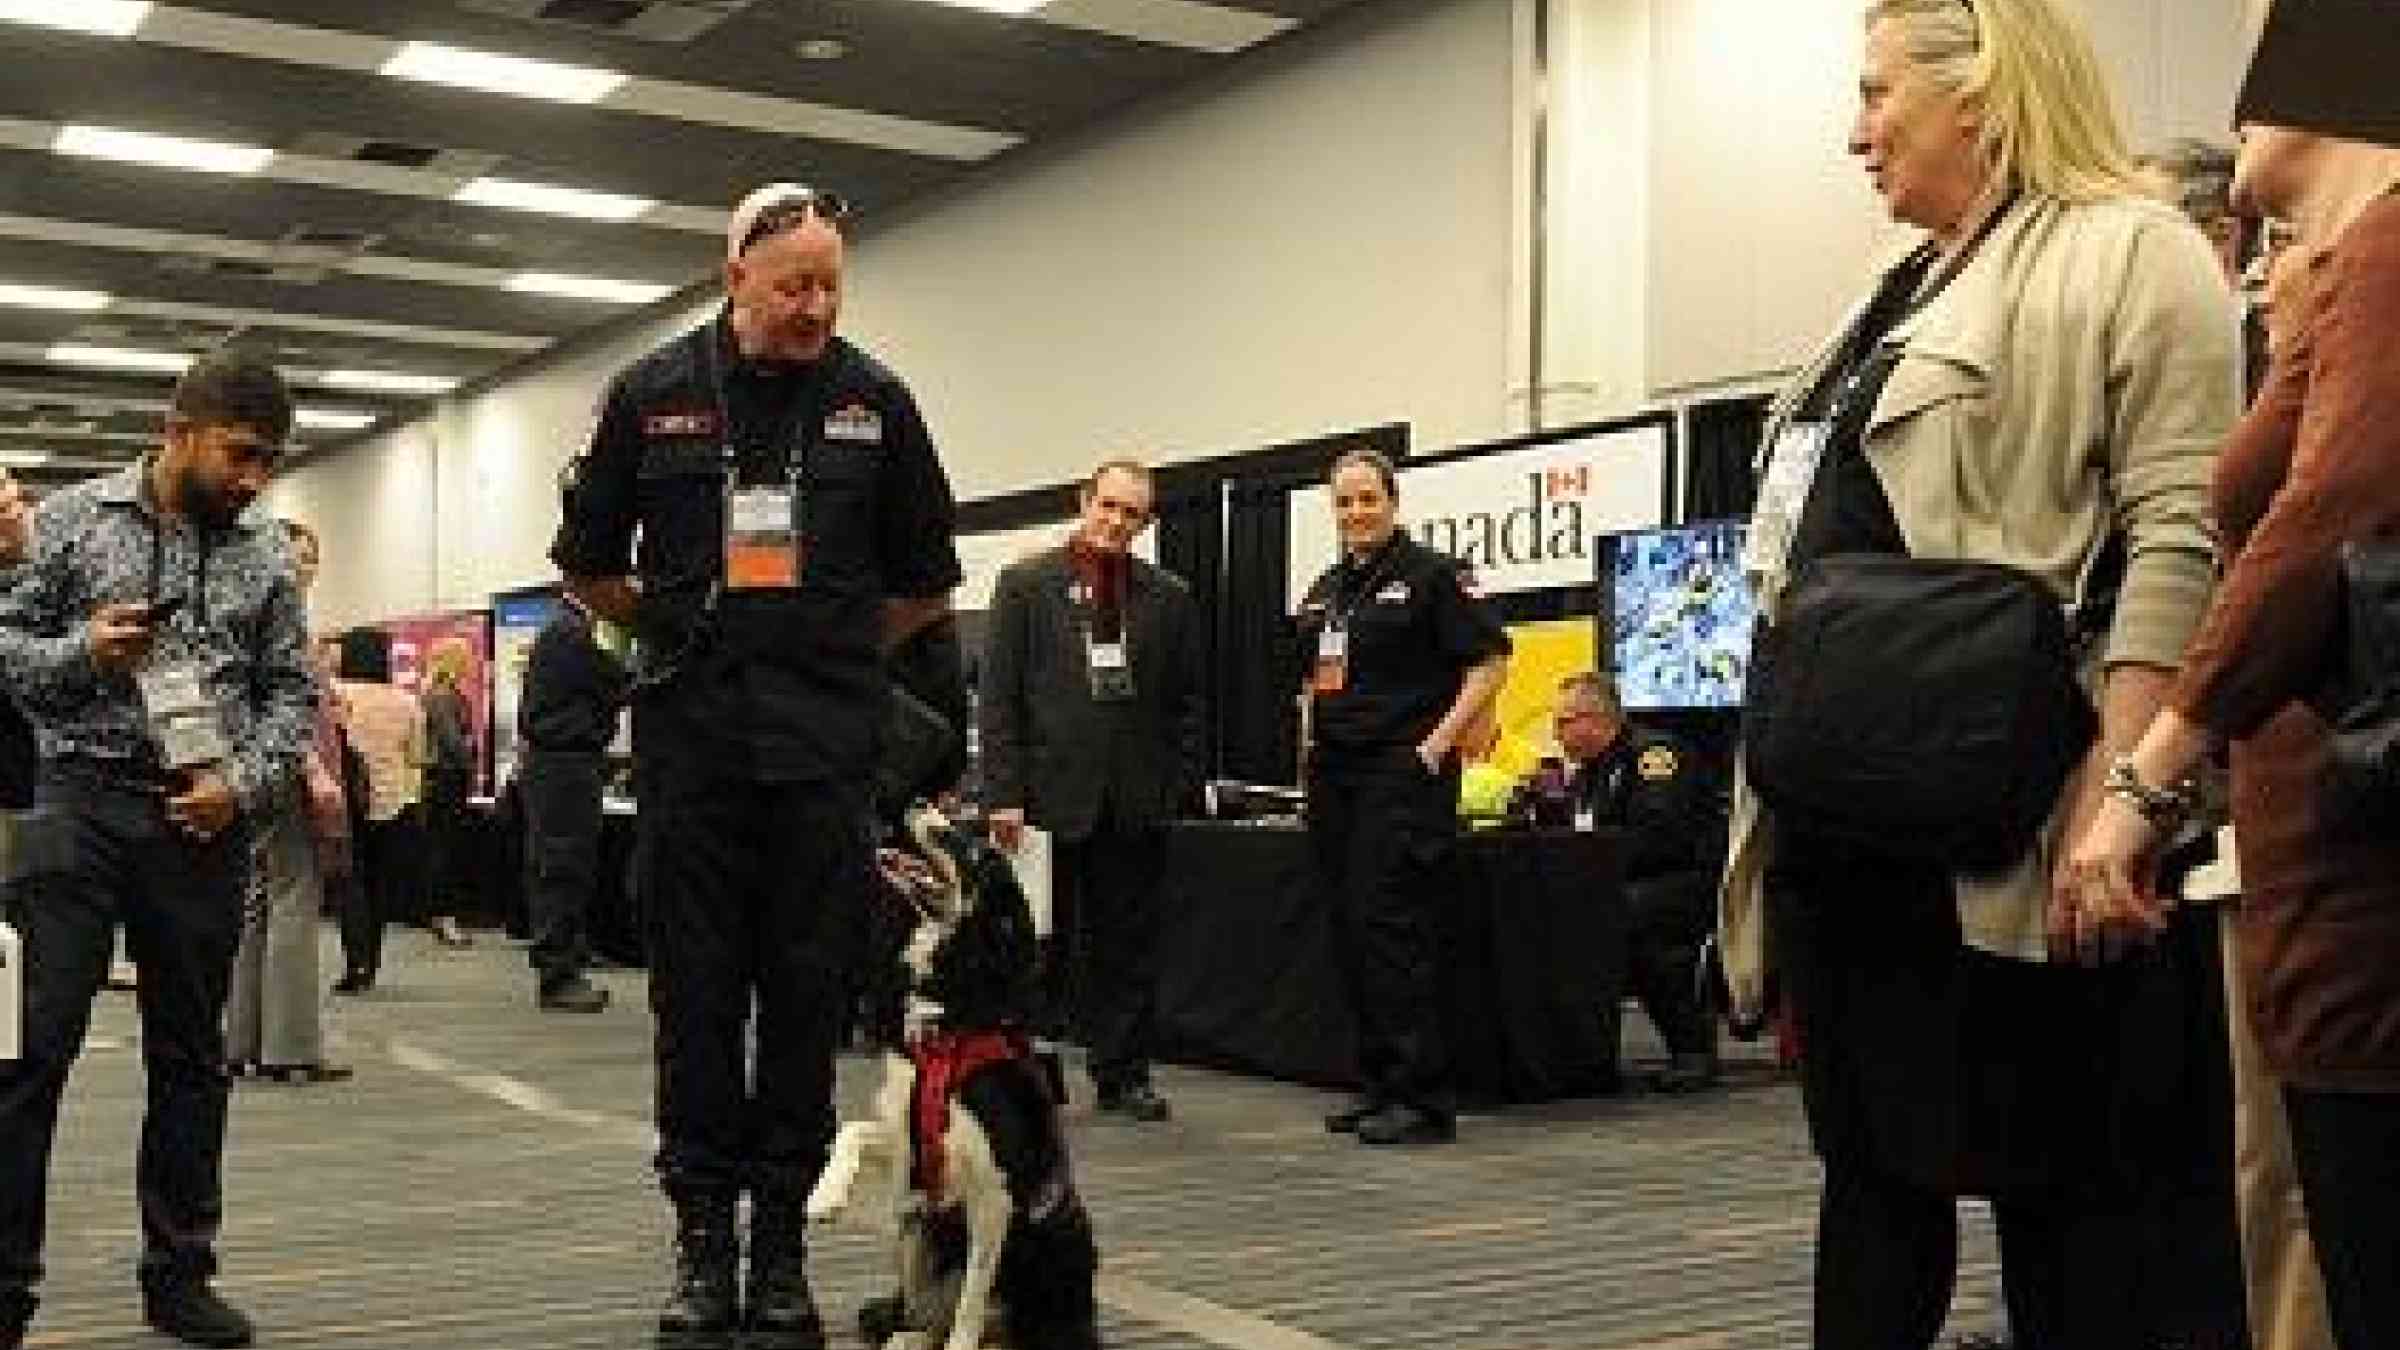 Baillie the Border Collie, a highly-skilled search and rescue dog, pictured here with her handler Mr. Kit Huffer, has become a star at the Americas region's top disaster risk reduction conference (Photo: Public Safety Canada/UNISDR)